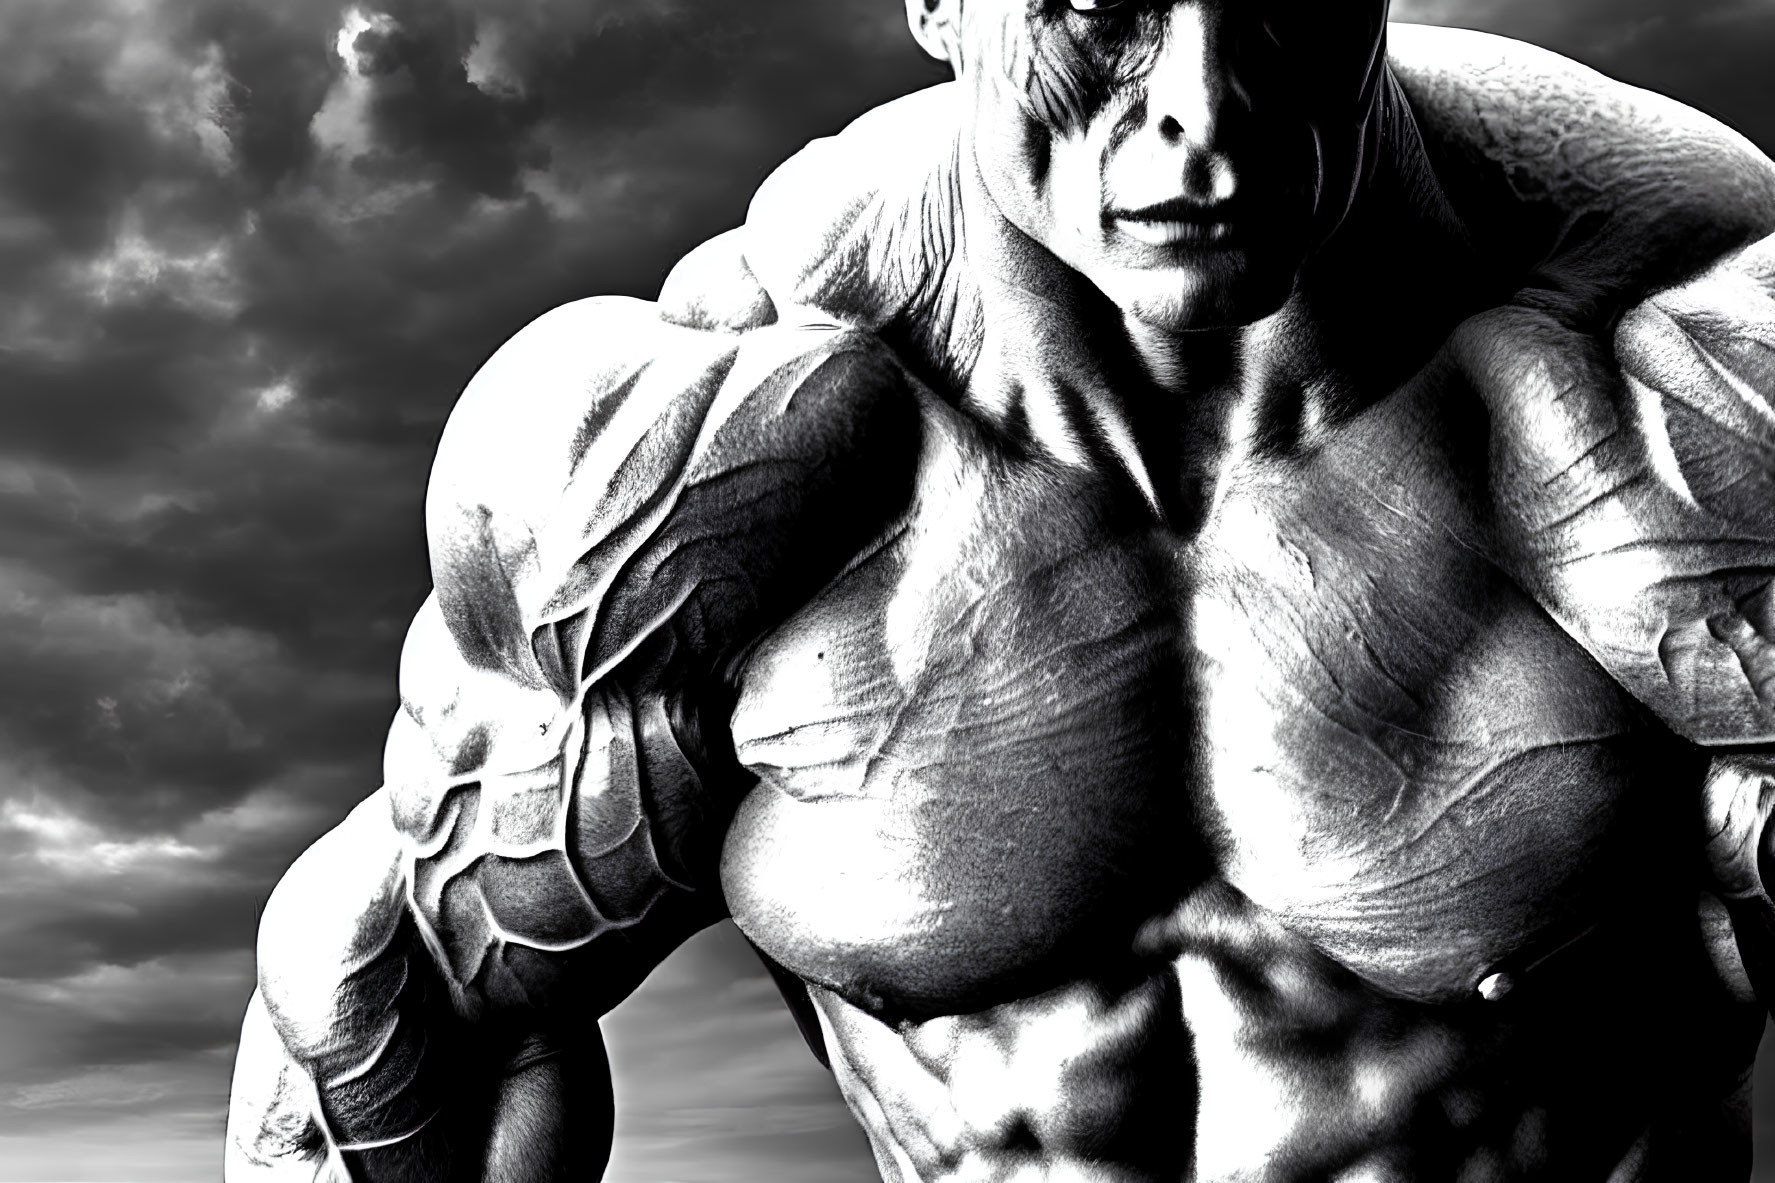 Muscular figure in monochrome against dramatic cloudy sky